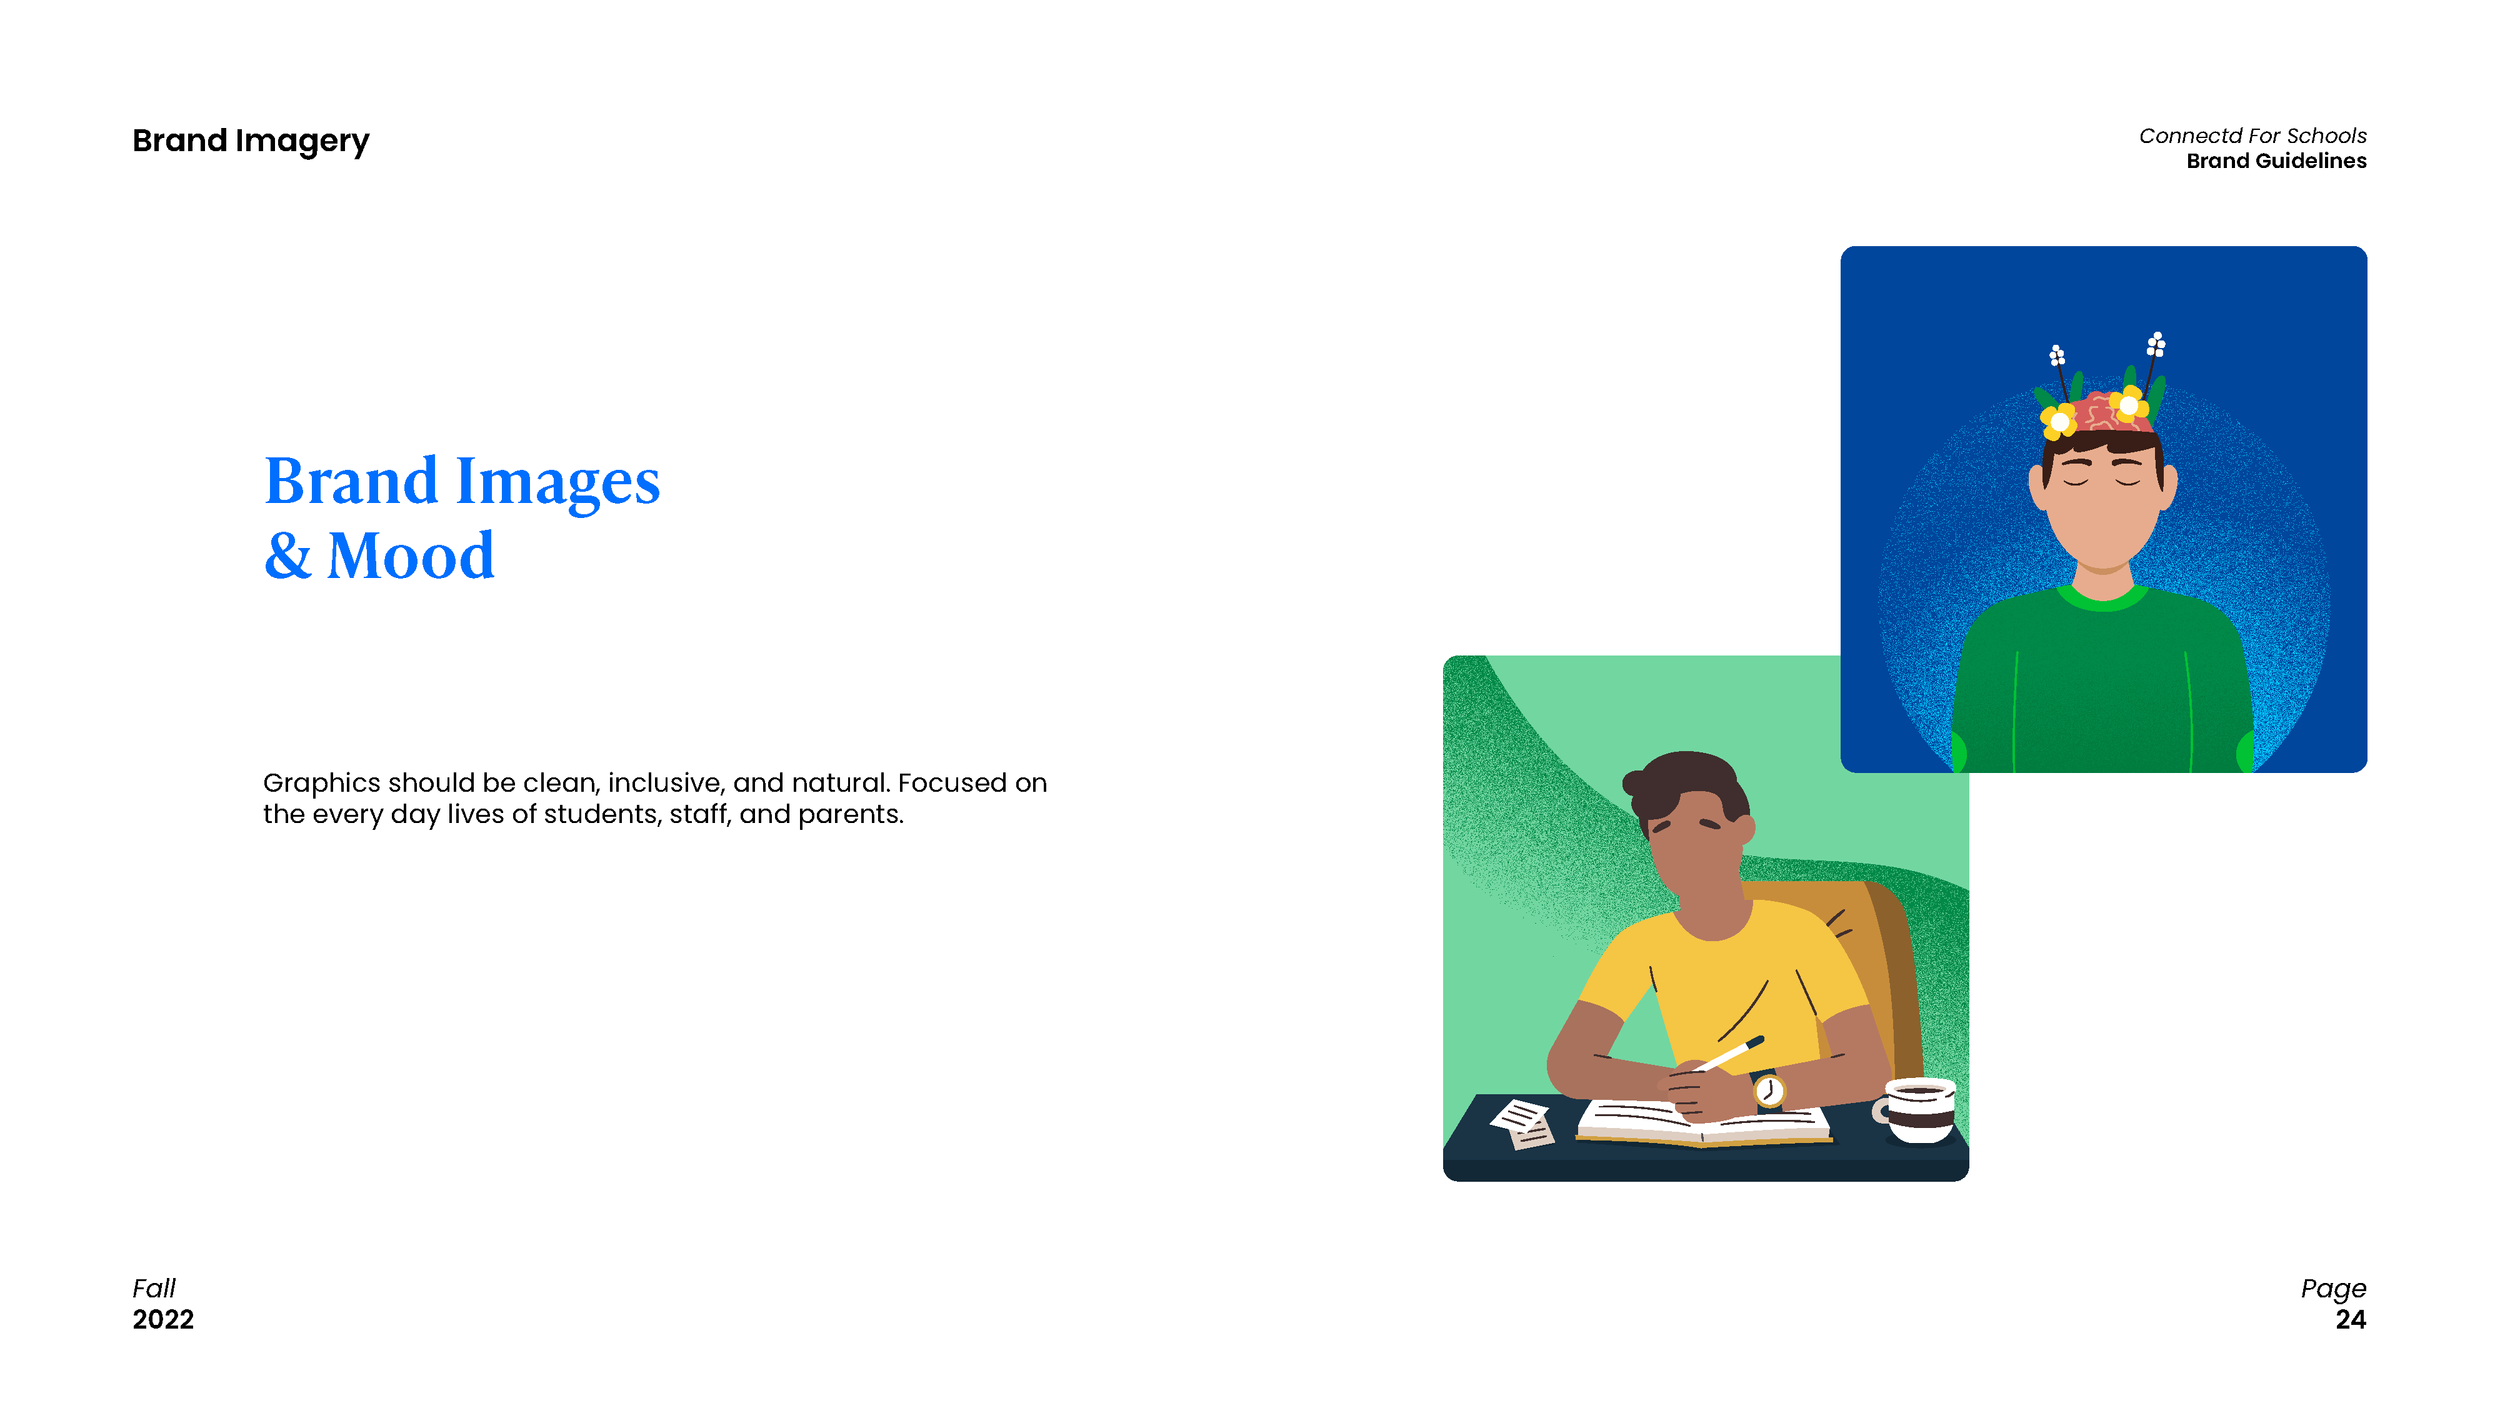 Connectd For Schools - Brand Guidelines_Page_24.png